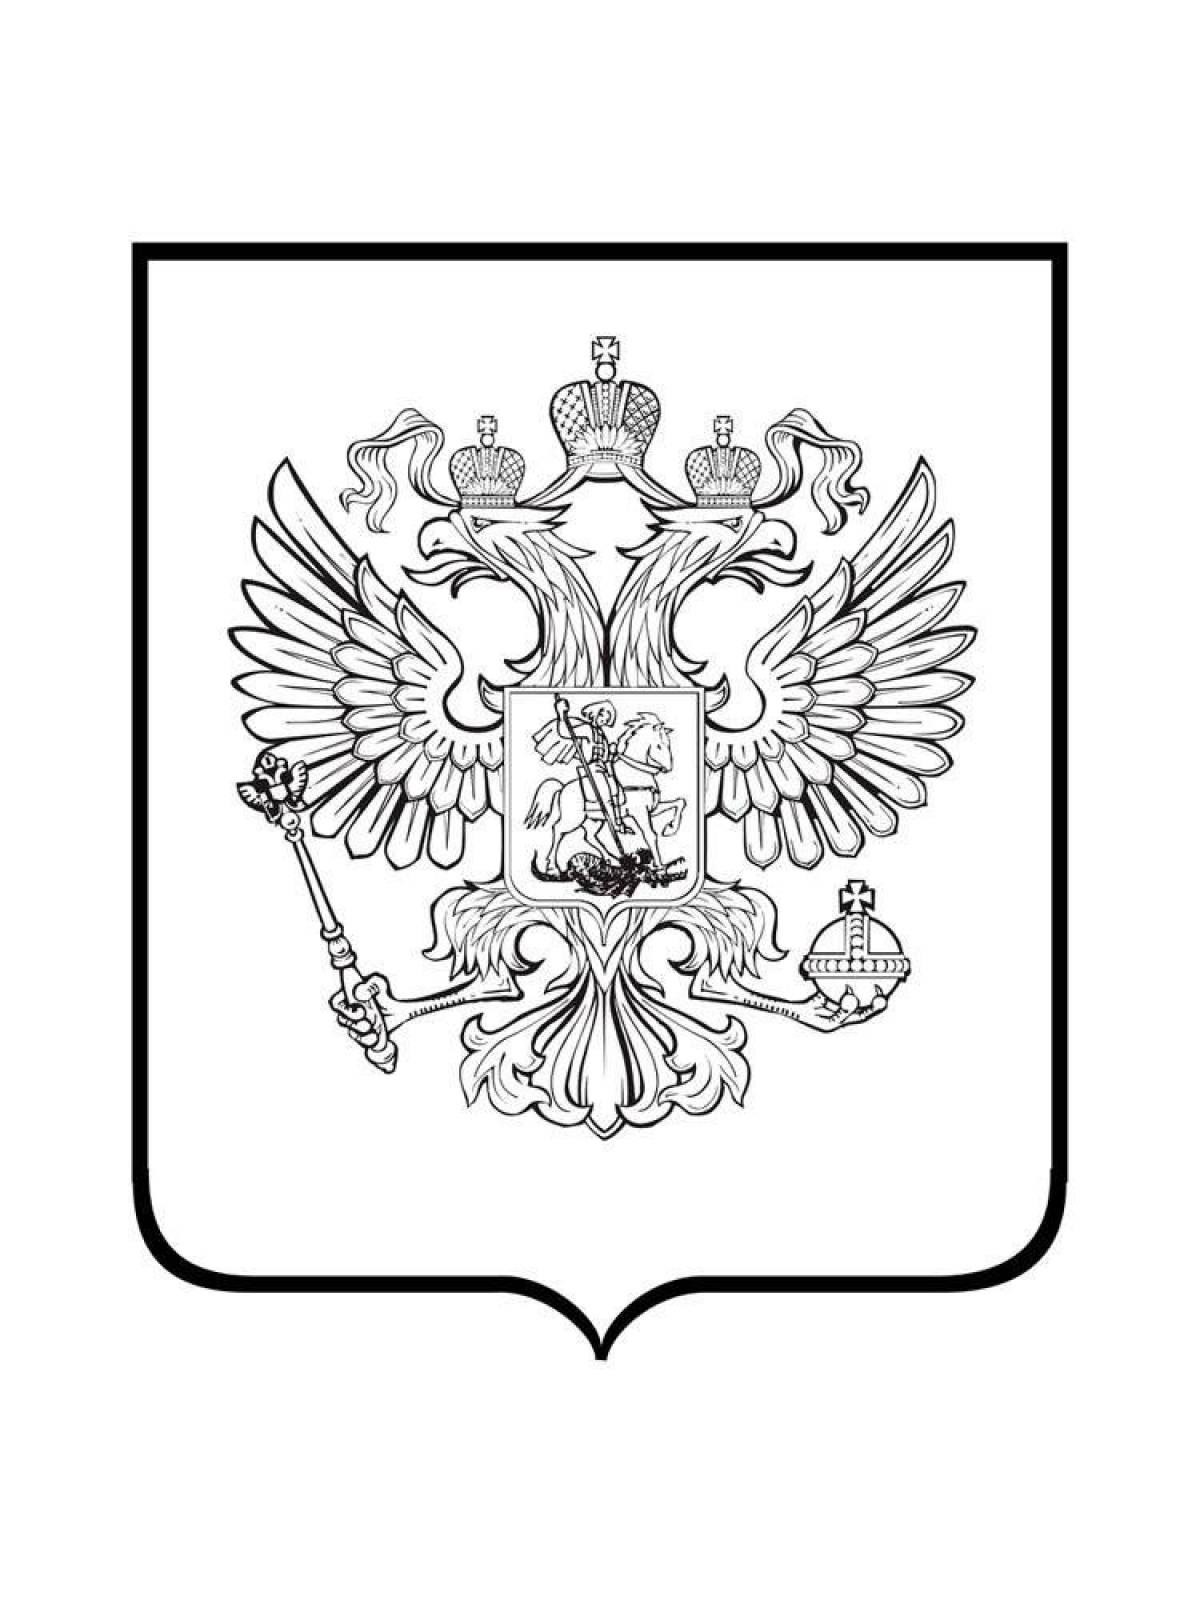 Fabulous coat of arms of Russia for the little ones